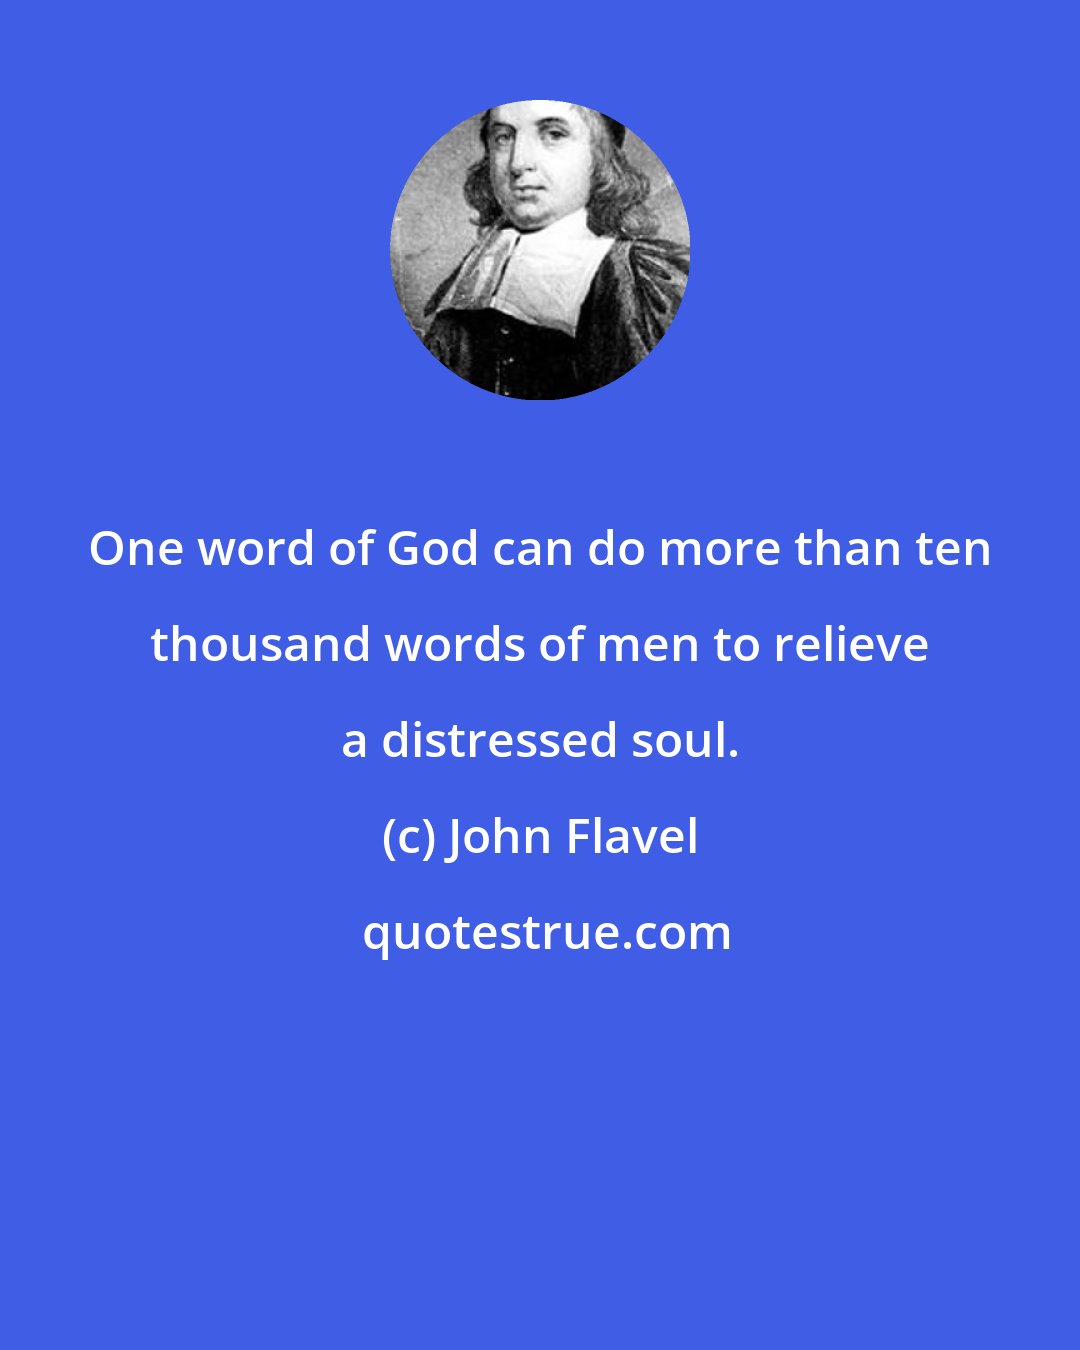 John Flavel: One word of God can do more than ten thousand words of men to relieve a distressed soul.